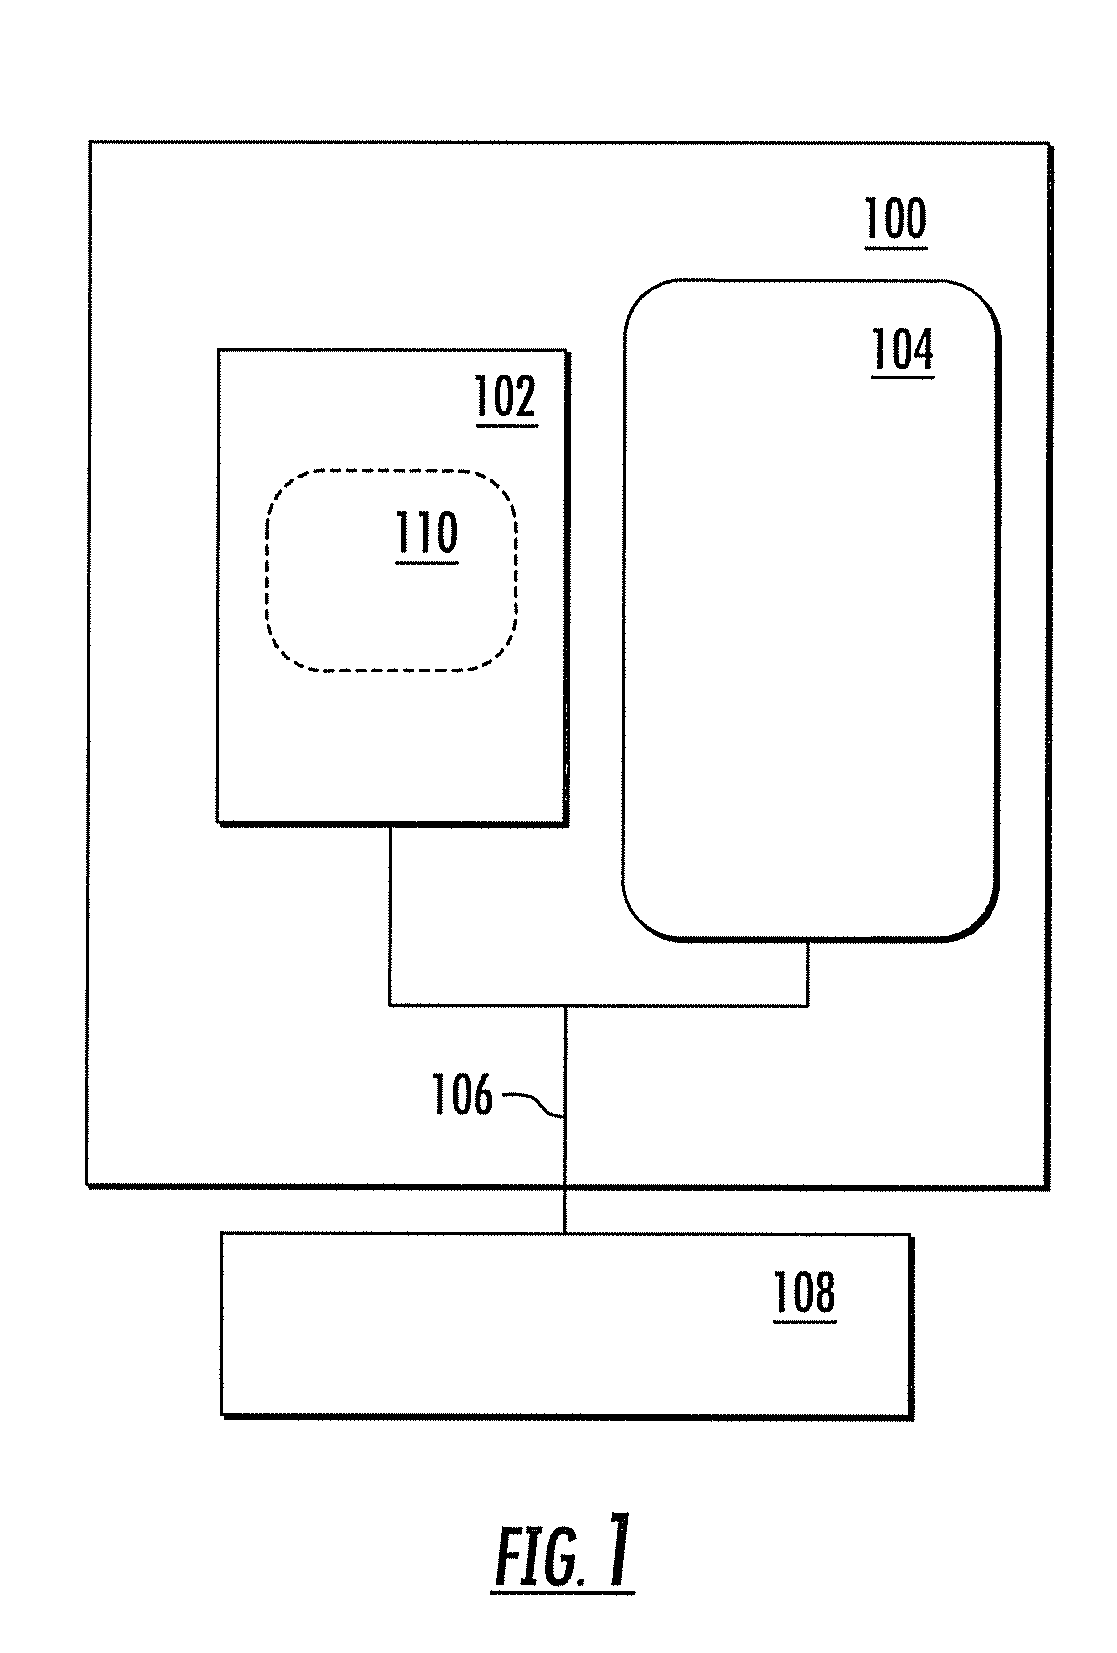 System and methods for sequencing learning objects based upon query and user relevancy